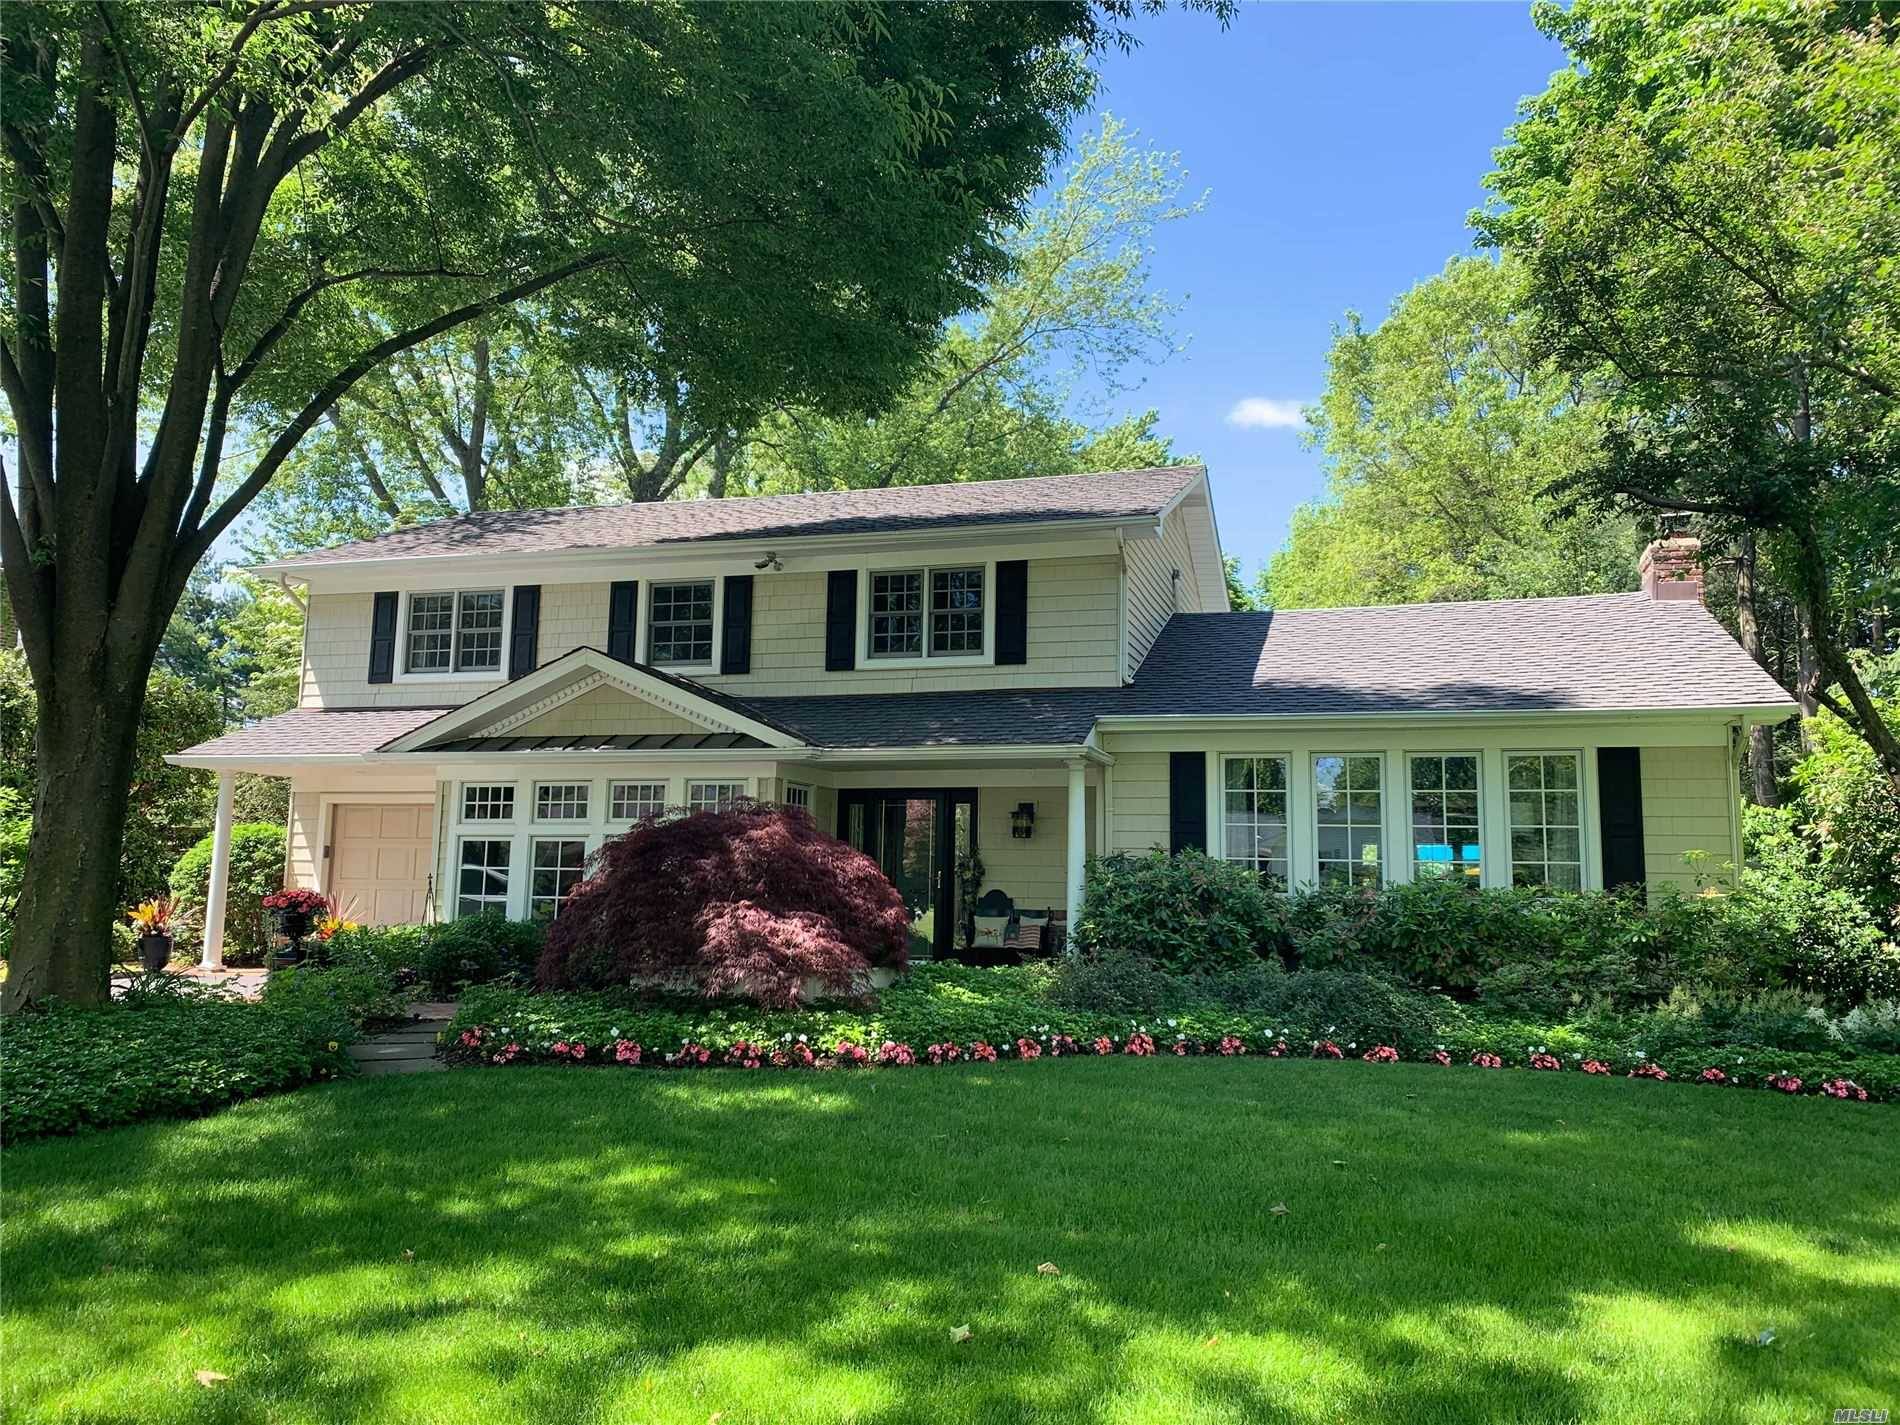 Picture Perfect Colonial Situated on Over Half an Acre With Meticulously Landscaped Grounds, This Incredible Colonial Features 4 Bedrooms, 2.